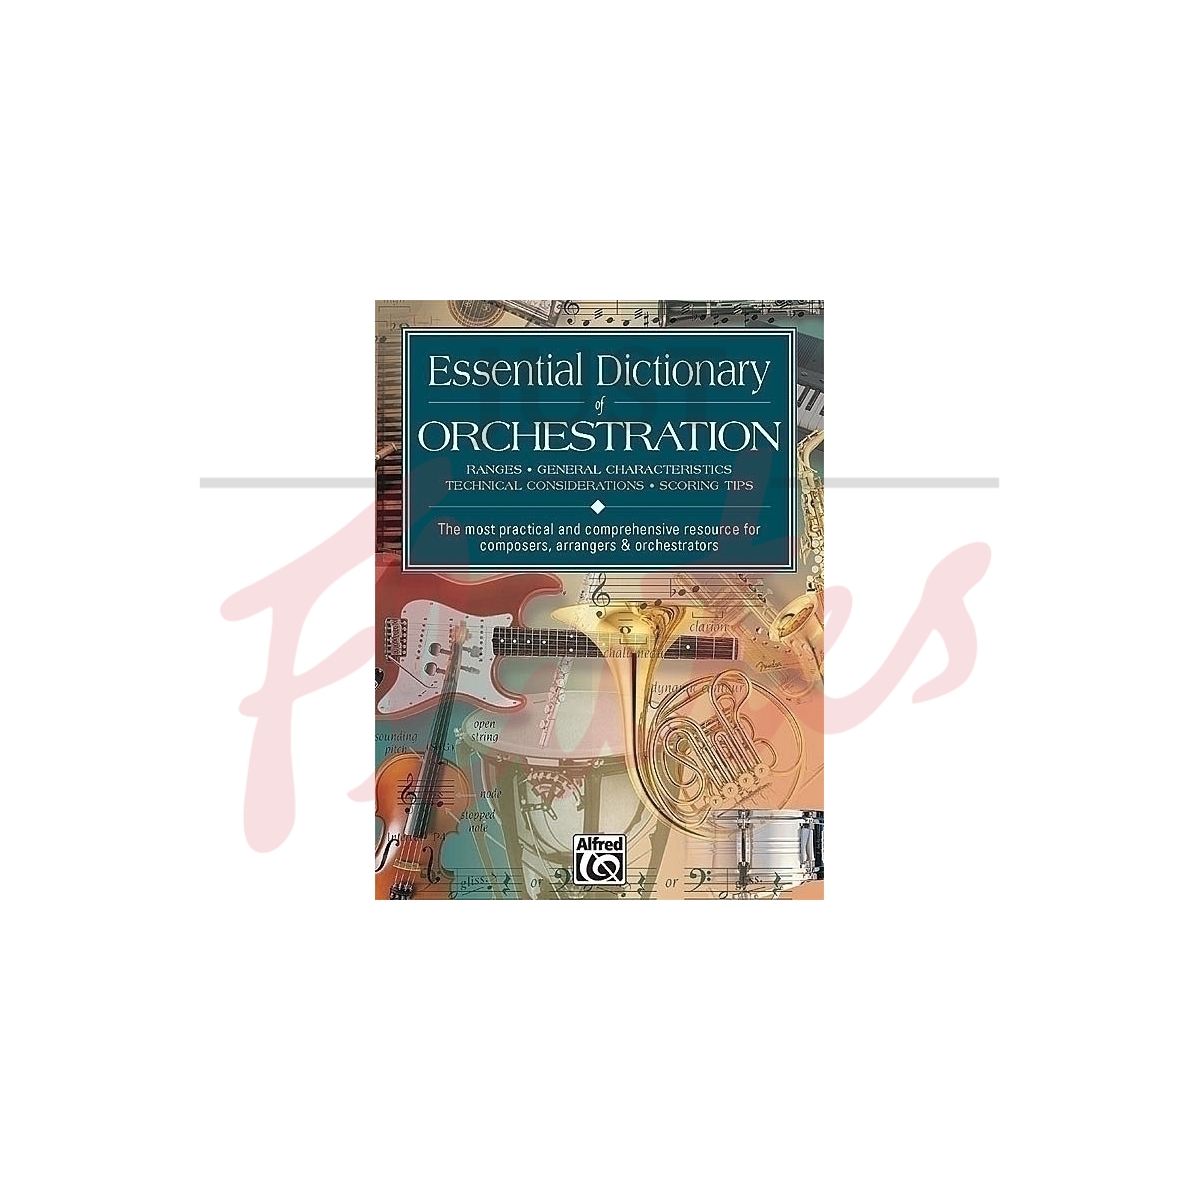 Essential Dictionary of Orchestration